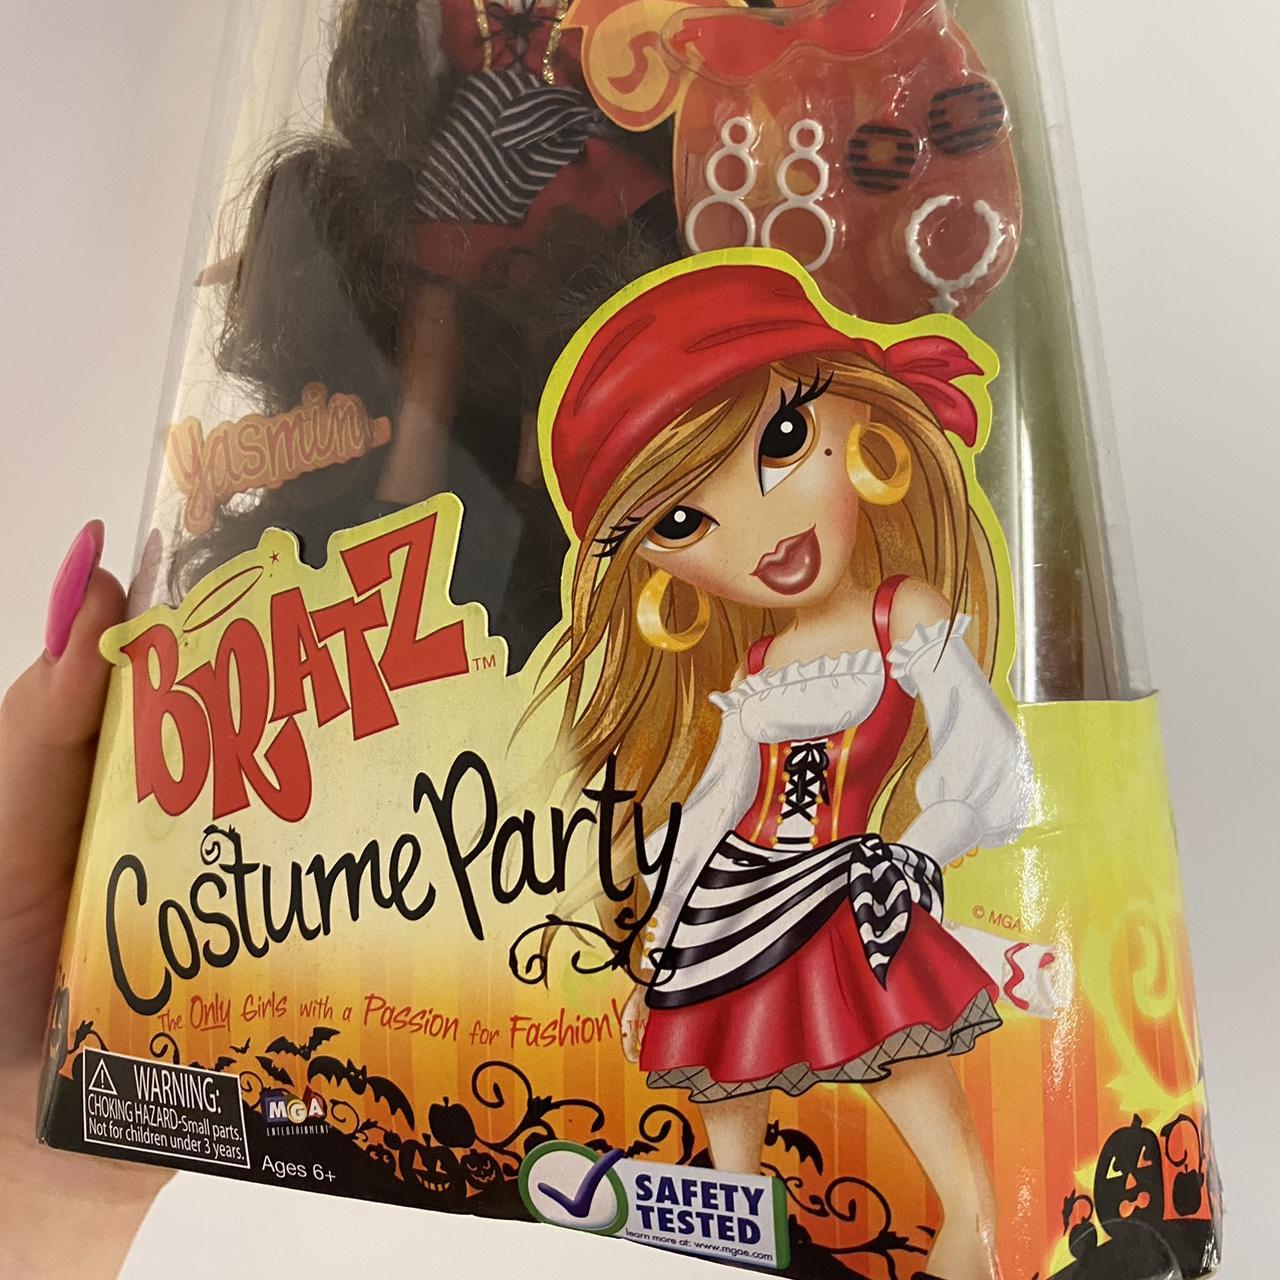 New in box costume party Yasmin. This doll is on the - Depop